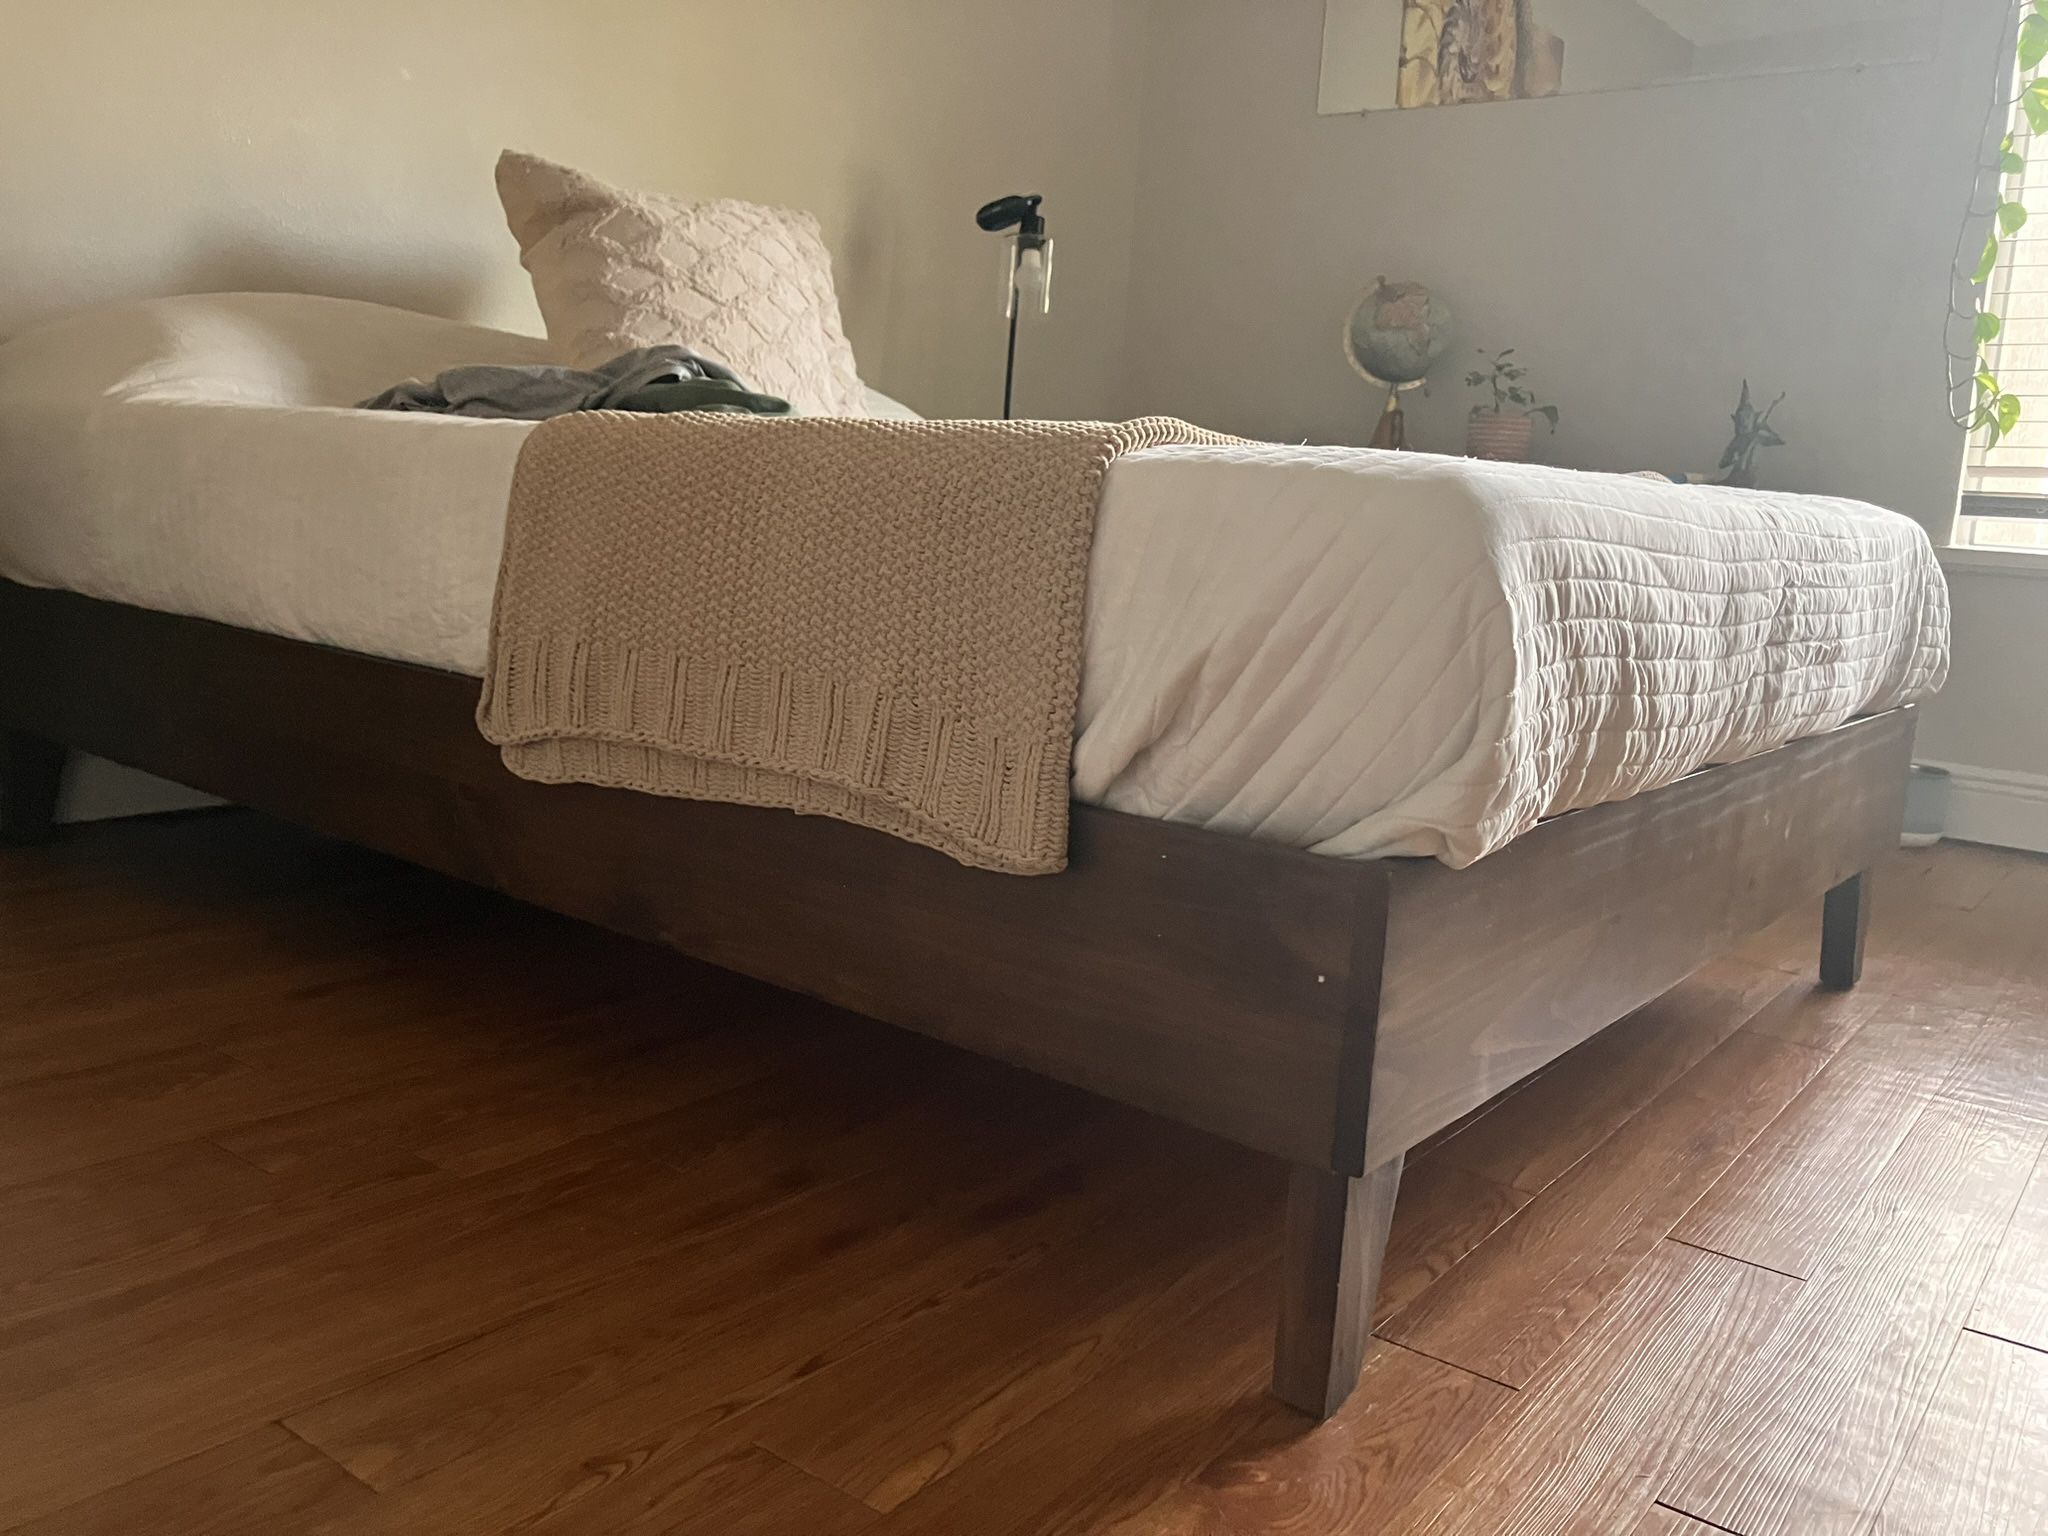 Full Size Real Wood Bed Frame 